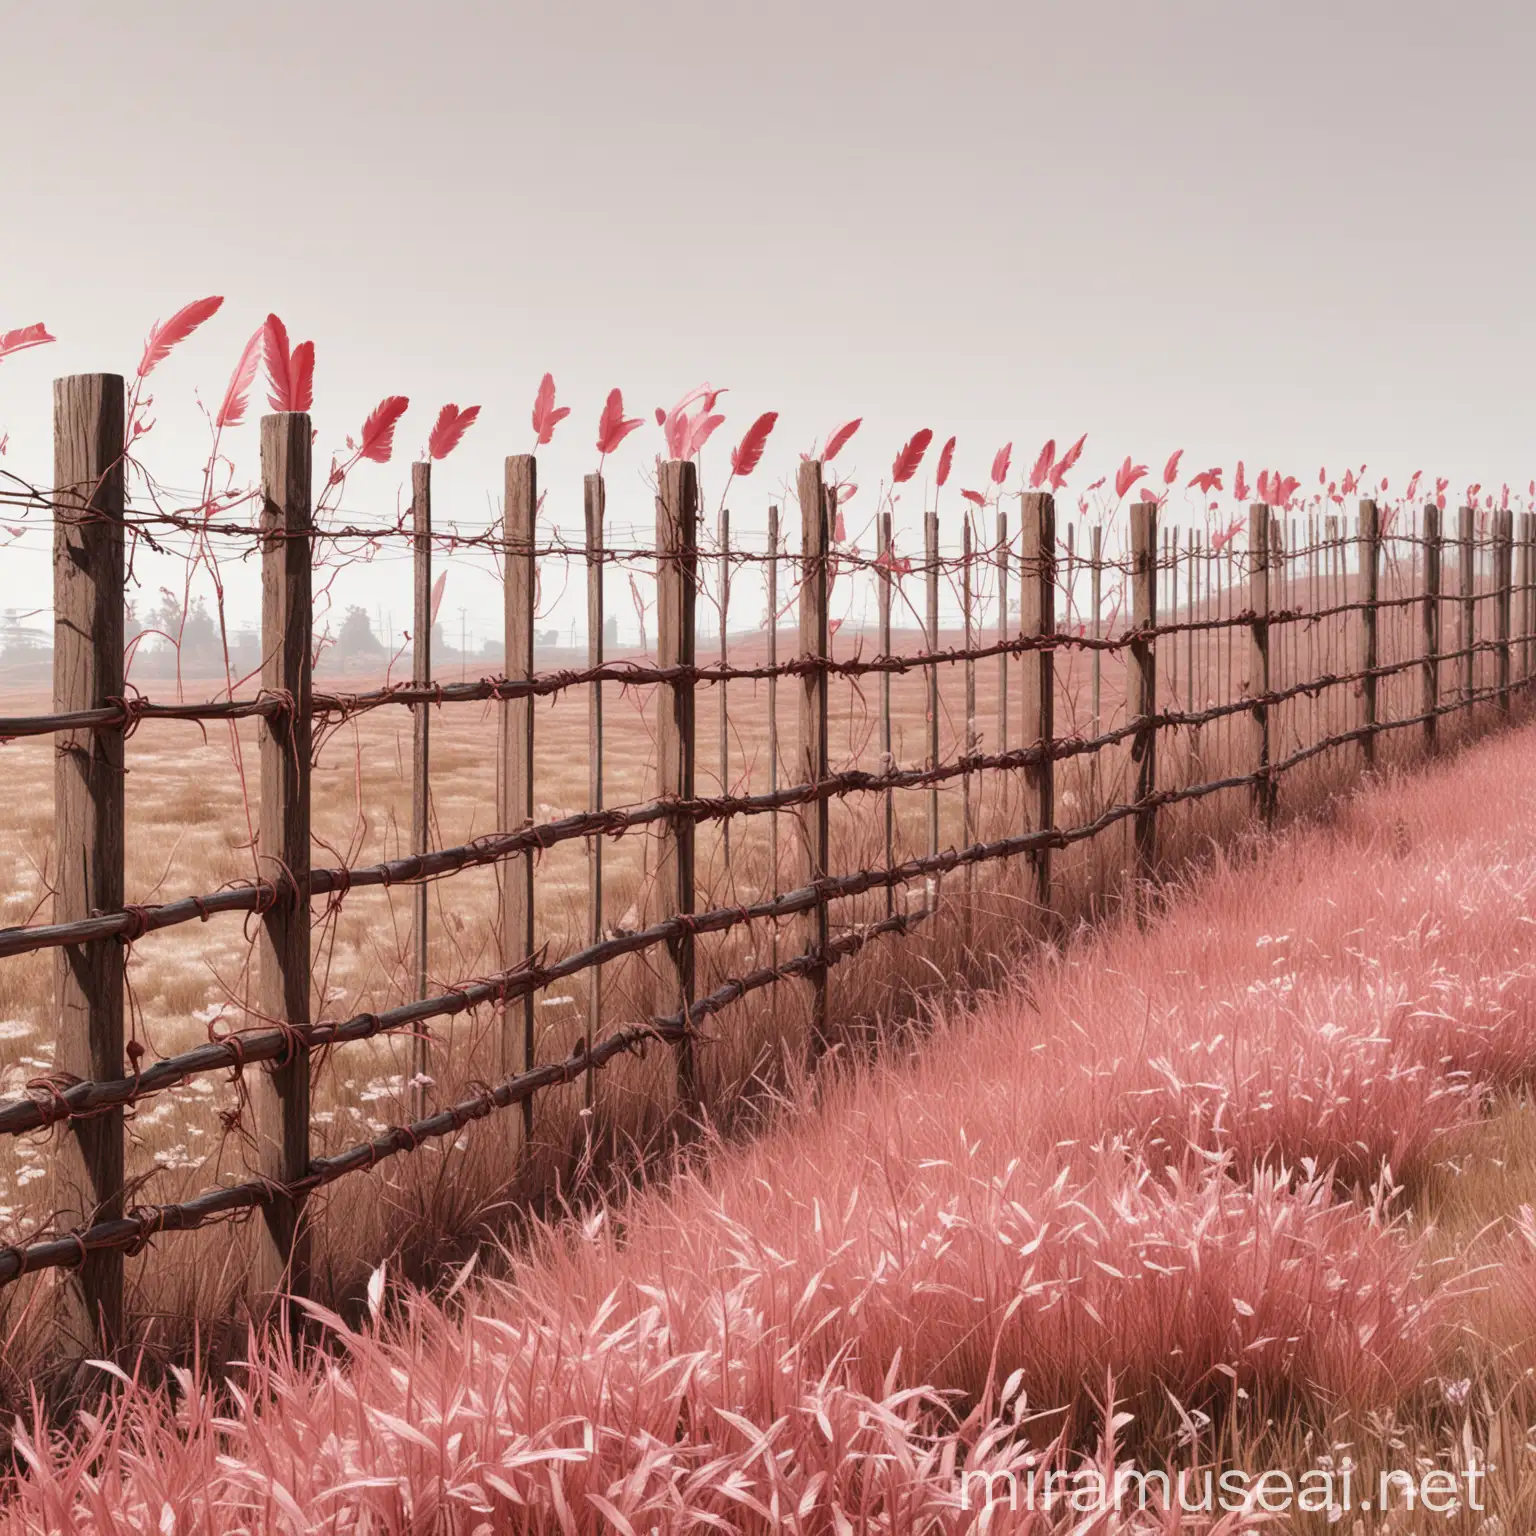 Realistic Field Fence Drawing with Gaps and Wires Light Red and Pink Colors